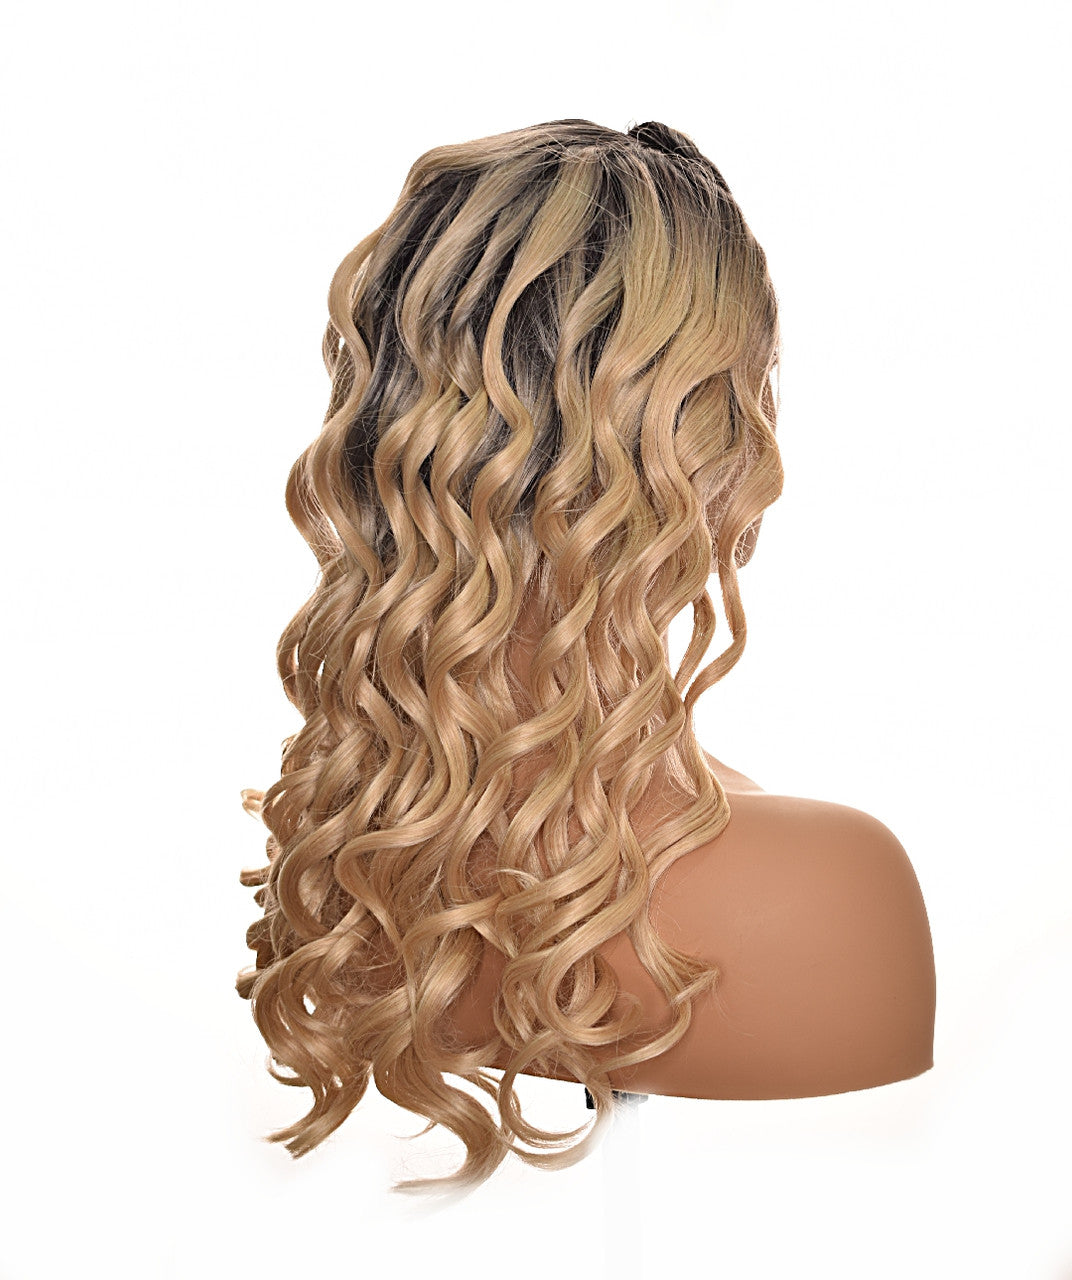 Caramel Ombre Blonde Curly Lace Front Wig. Larissa Wigs